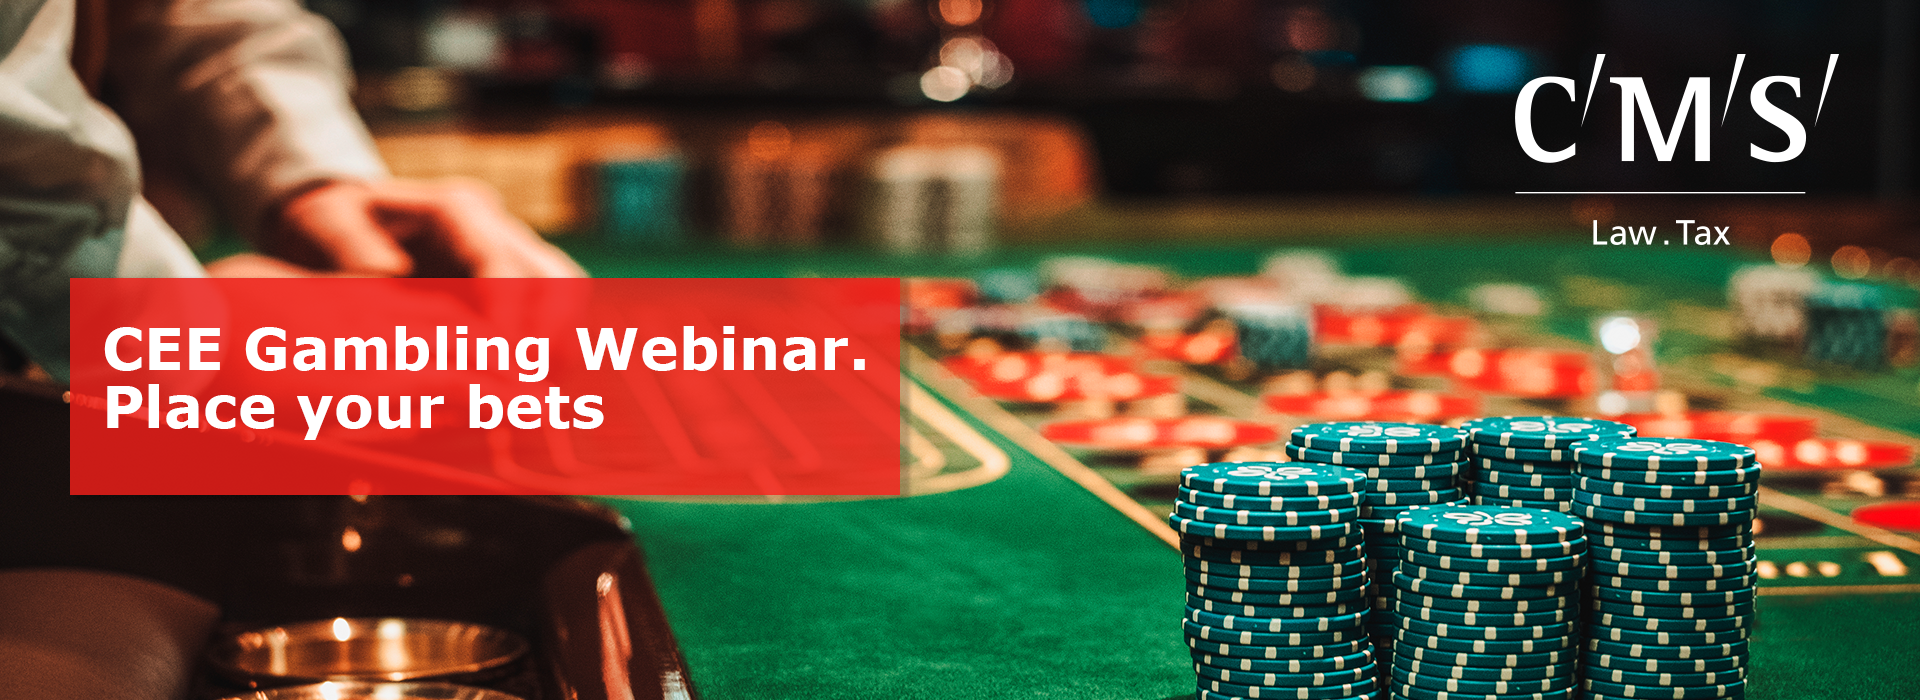 CEE Gambling Webinar. Place your bets.